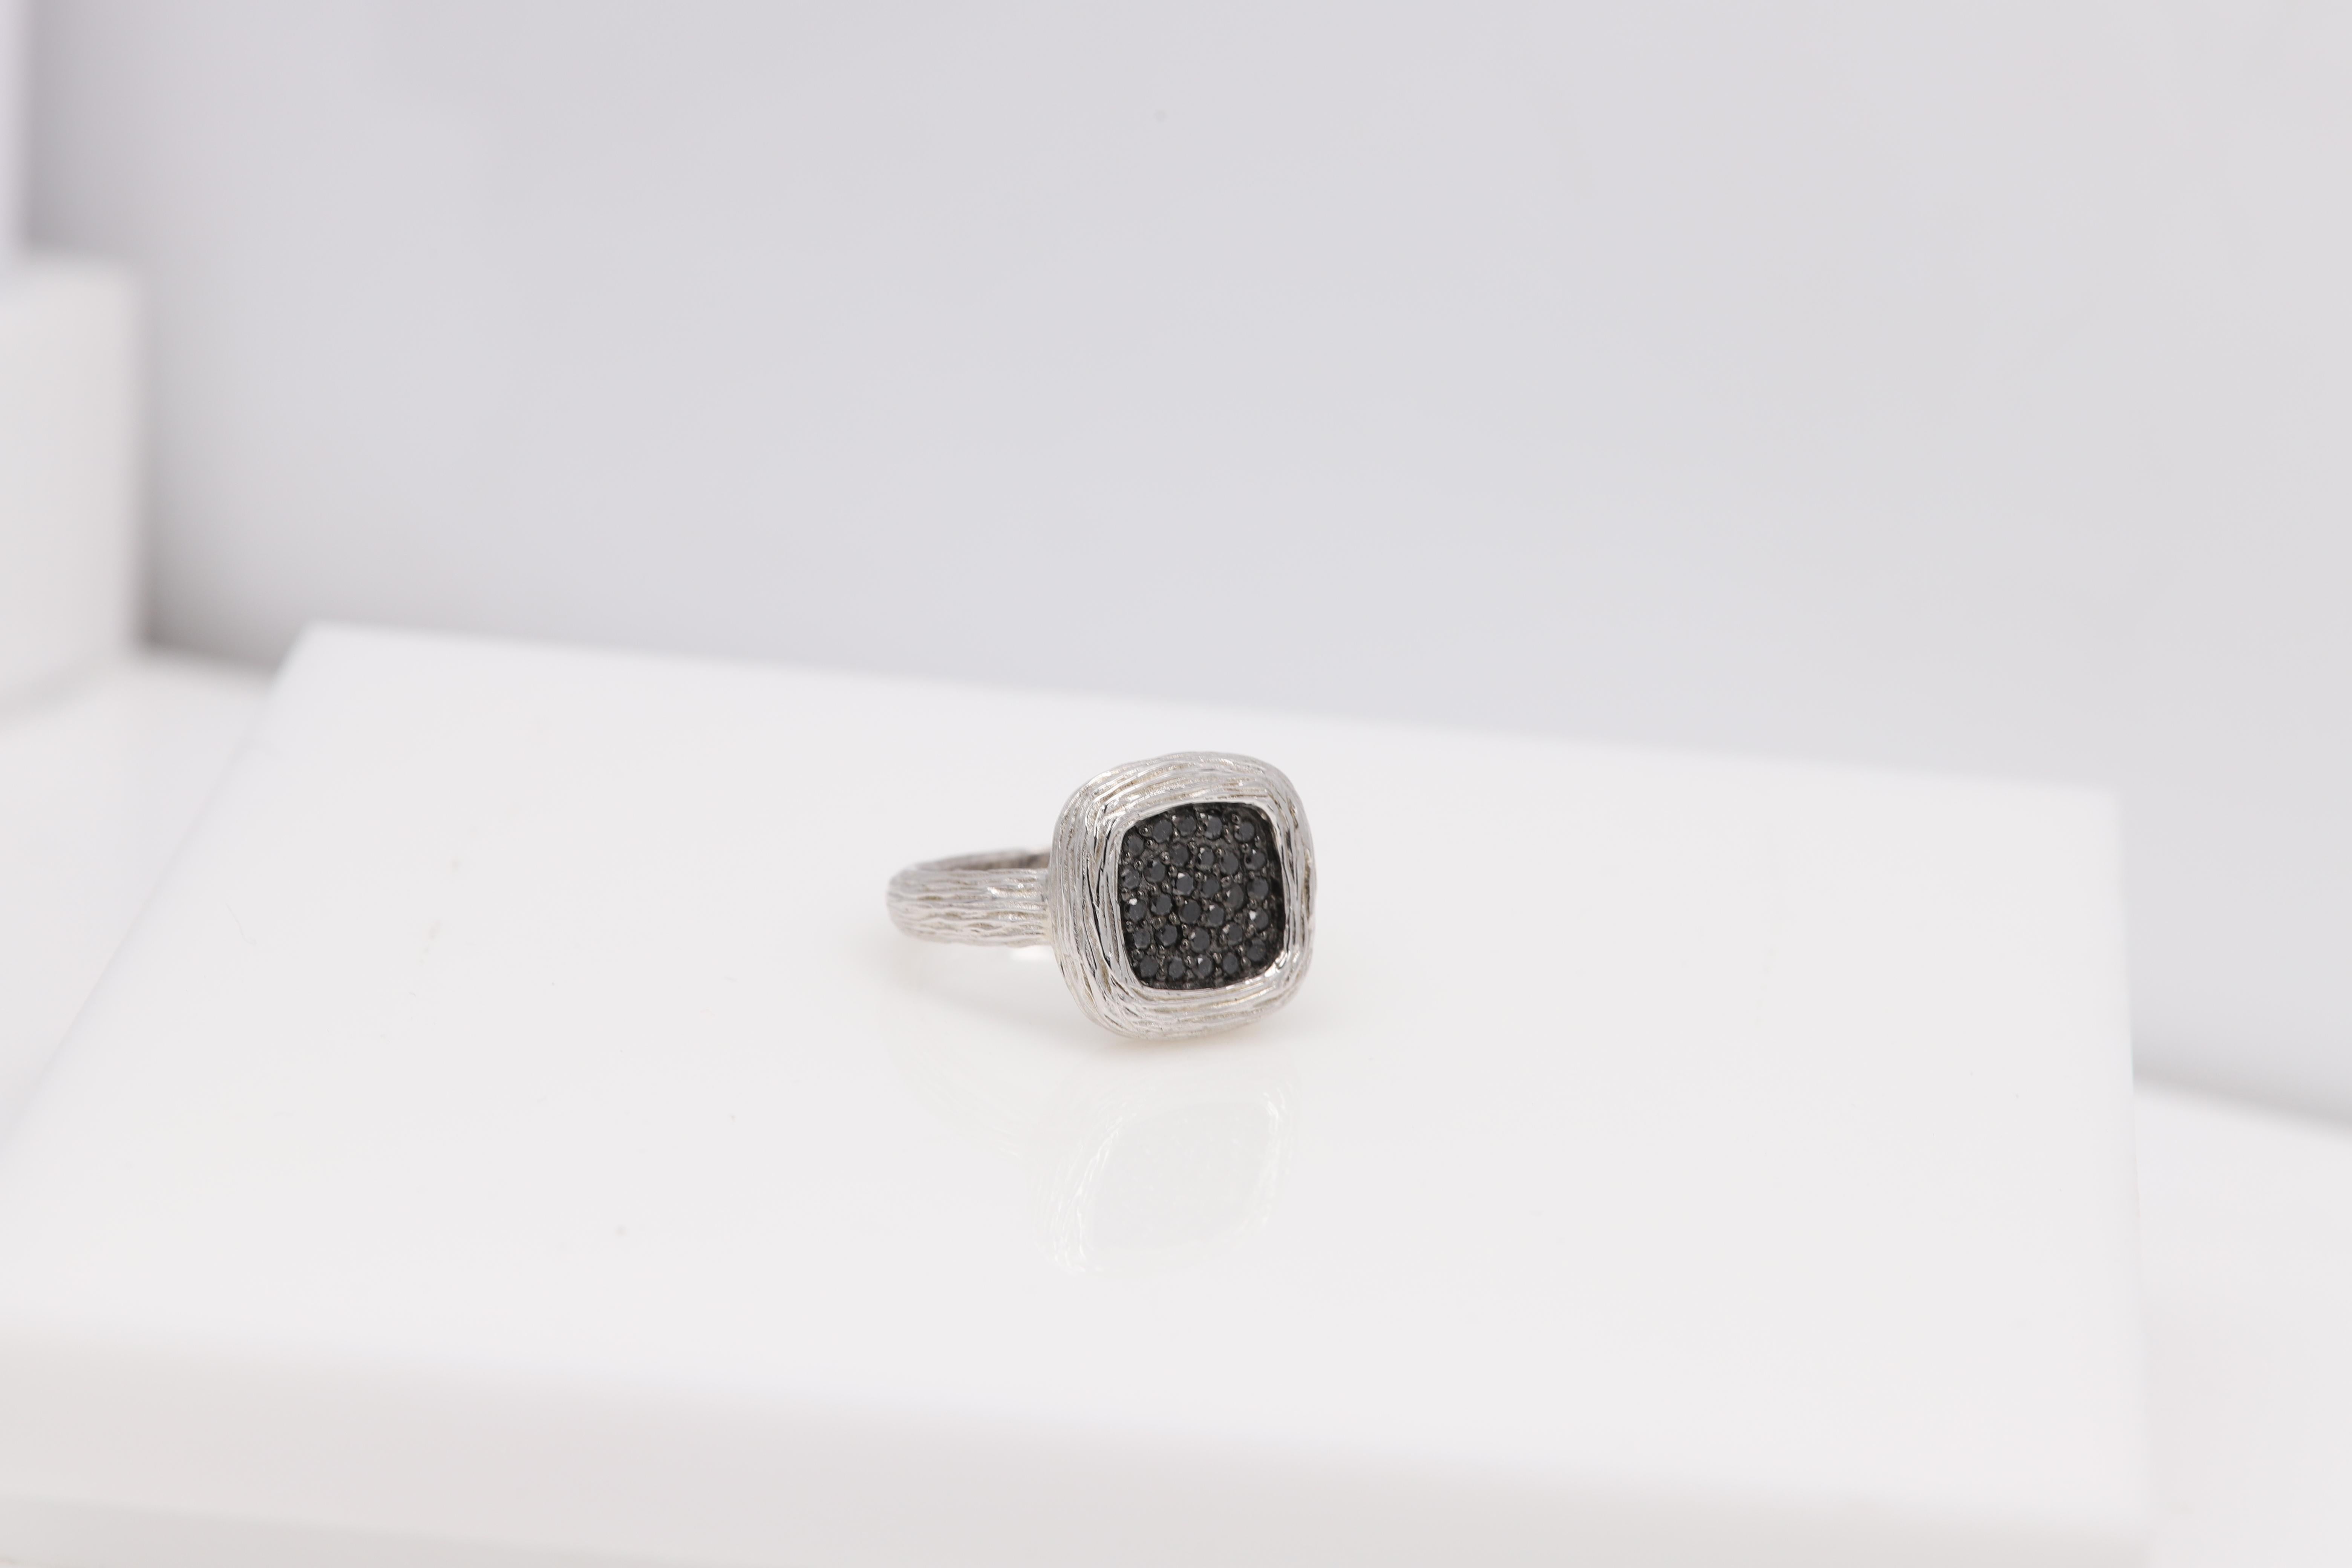 Sterling Silver 925 Ring
with Natural Black Diamonds
Cluster Design and Groove texture
Black Diamonds approx 0.43 carat 
Weight  5.40 grams
Finger Size 6
Design area is approx 14 x 14 mm square shape

(oro sr52079-228)